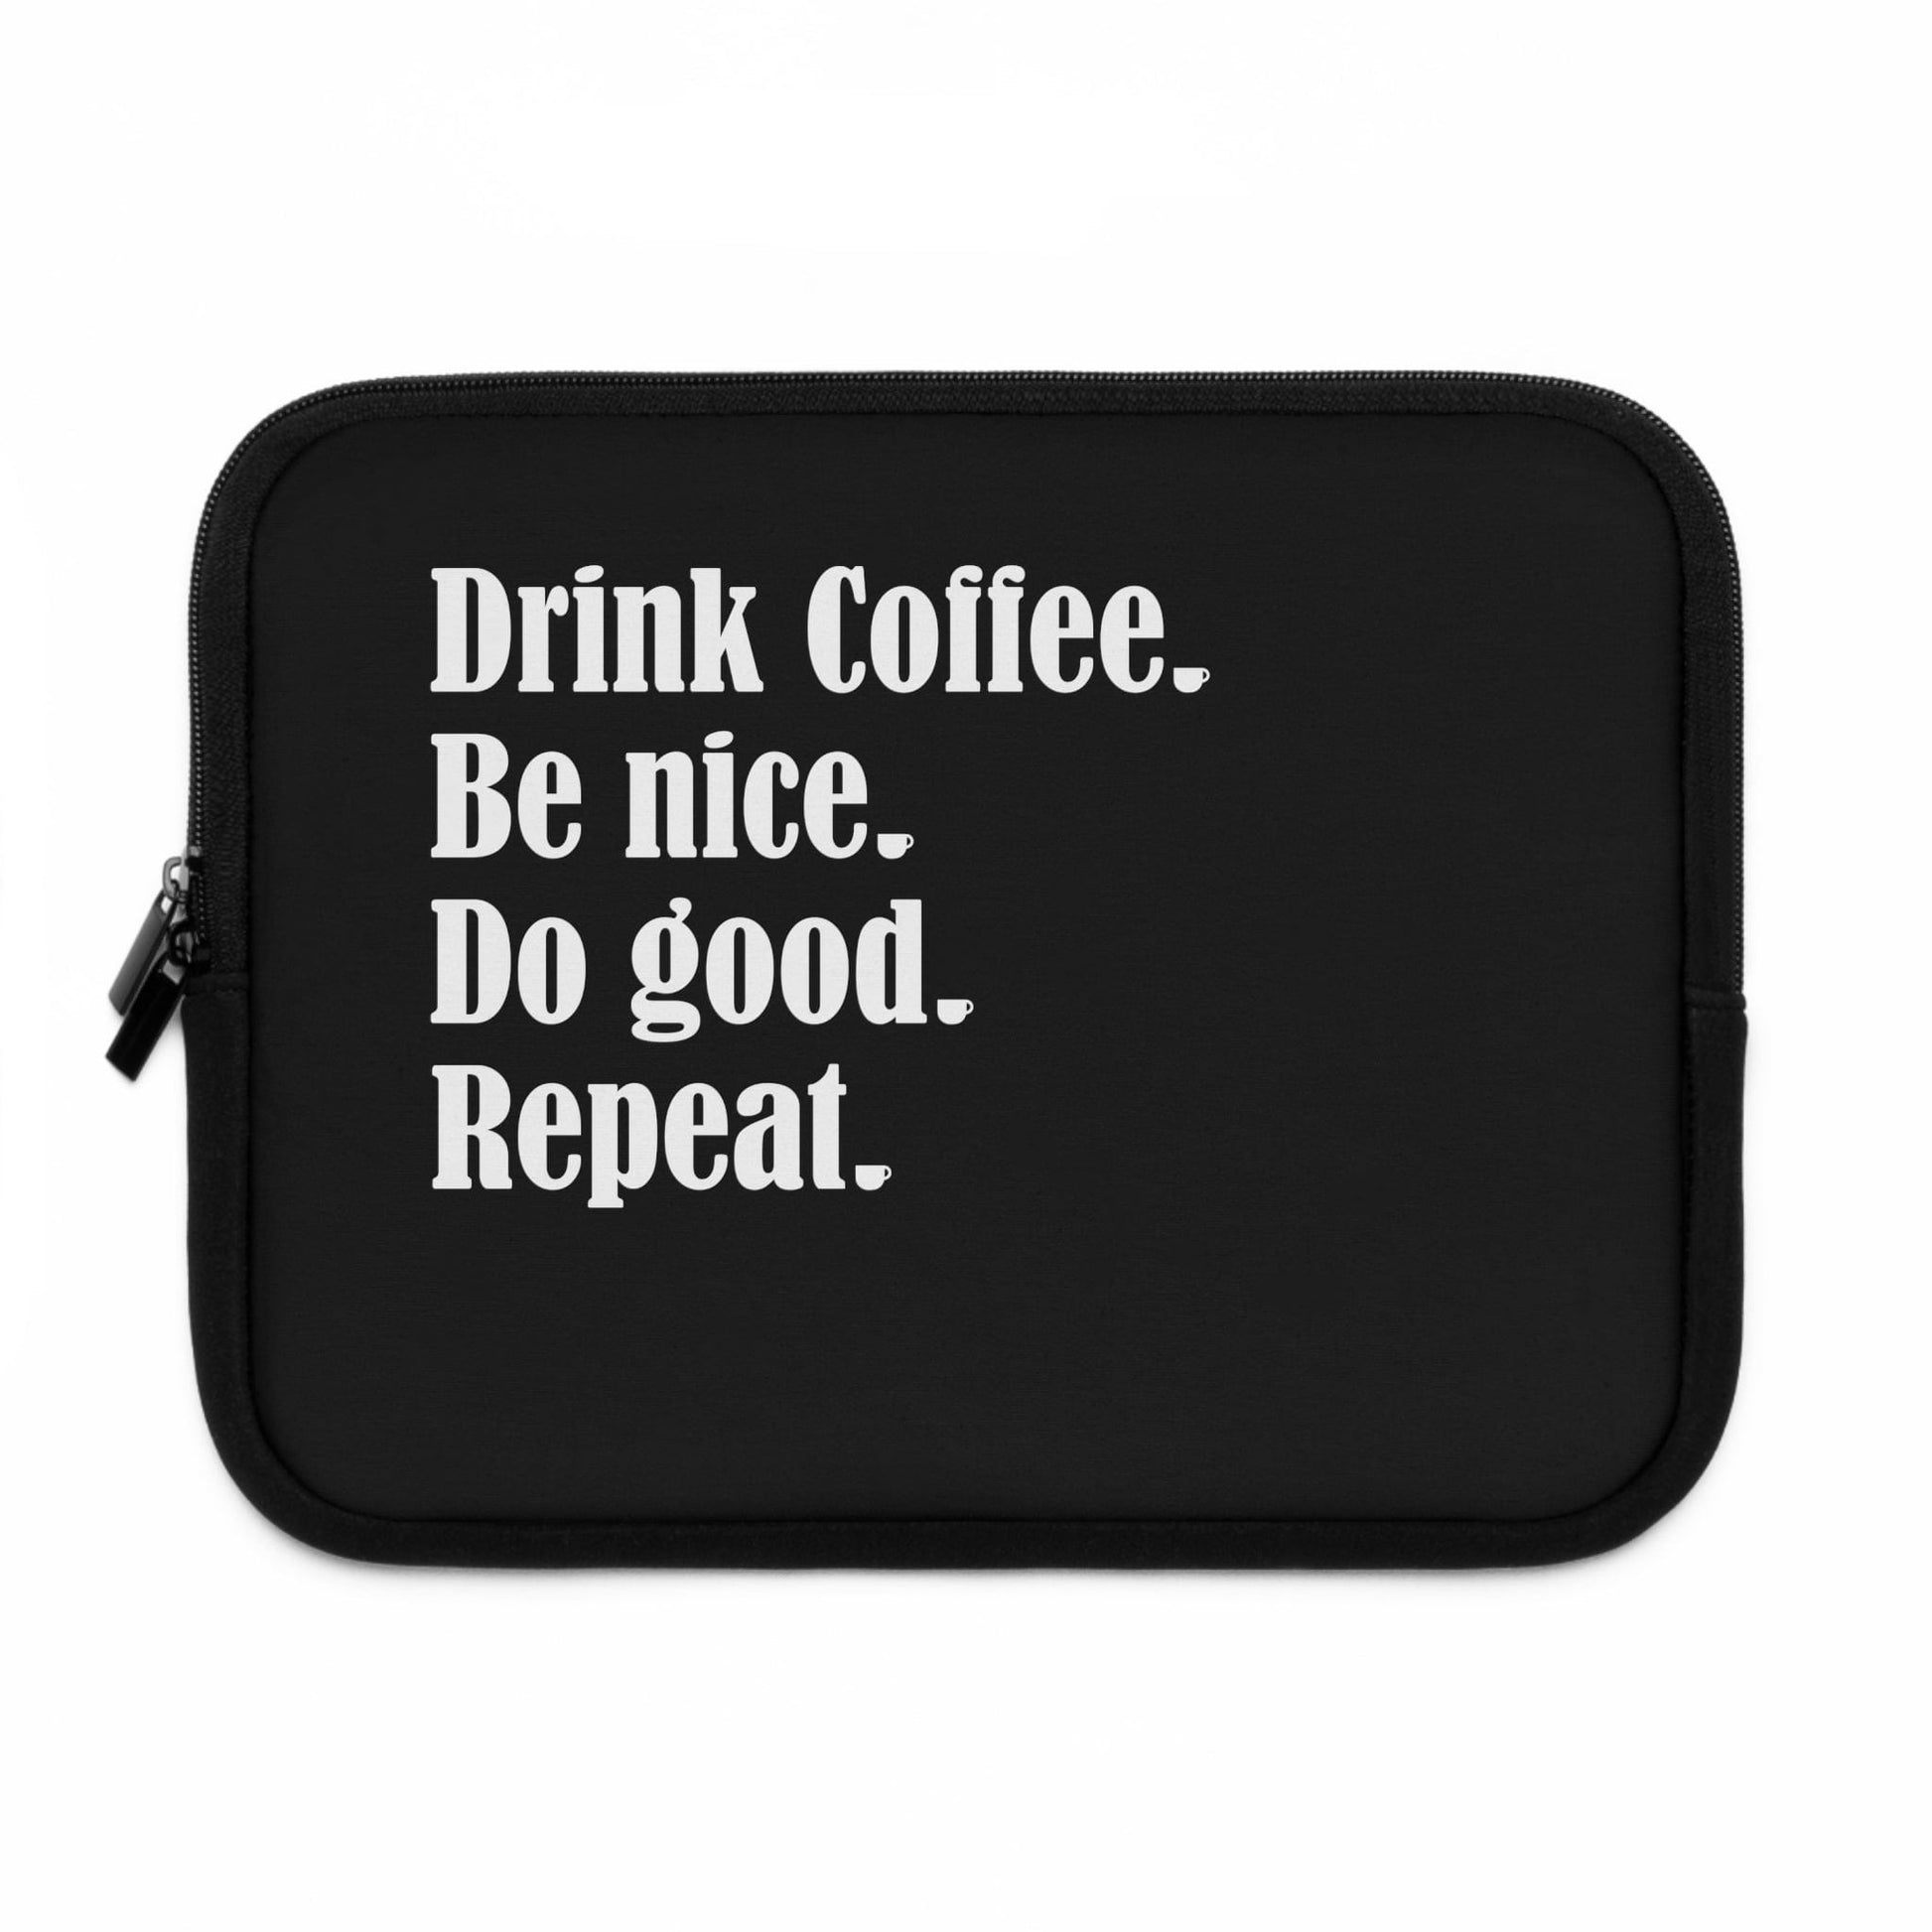 Good Bean Gifts "Drink Coffee, Be Nice, Do Good, Repeat" Laptop Sleeve Black / 10"